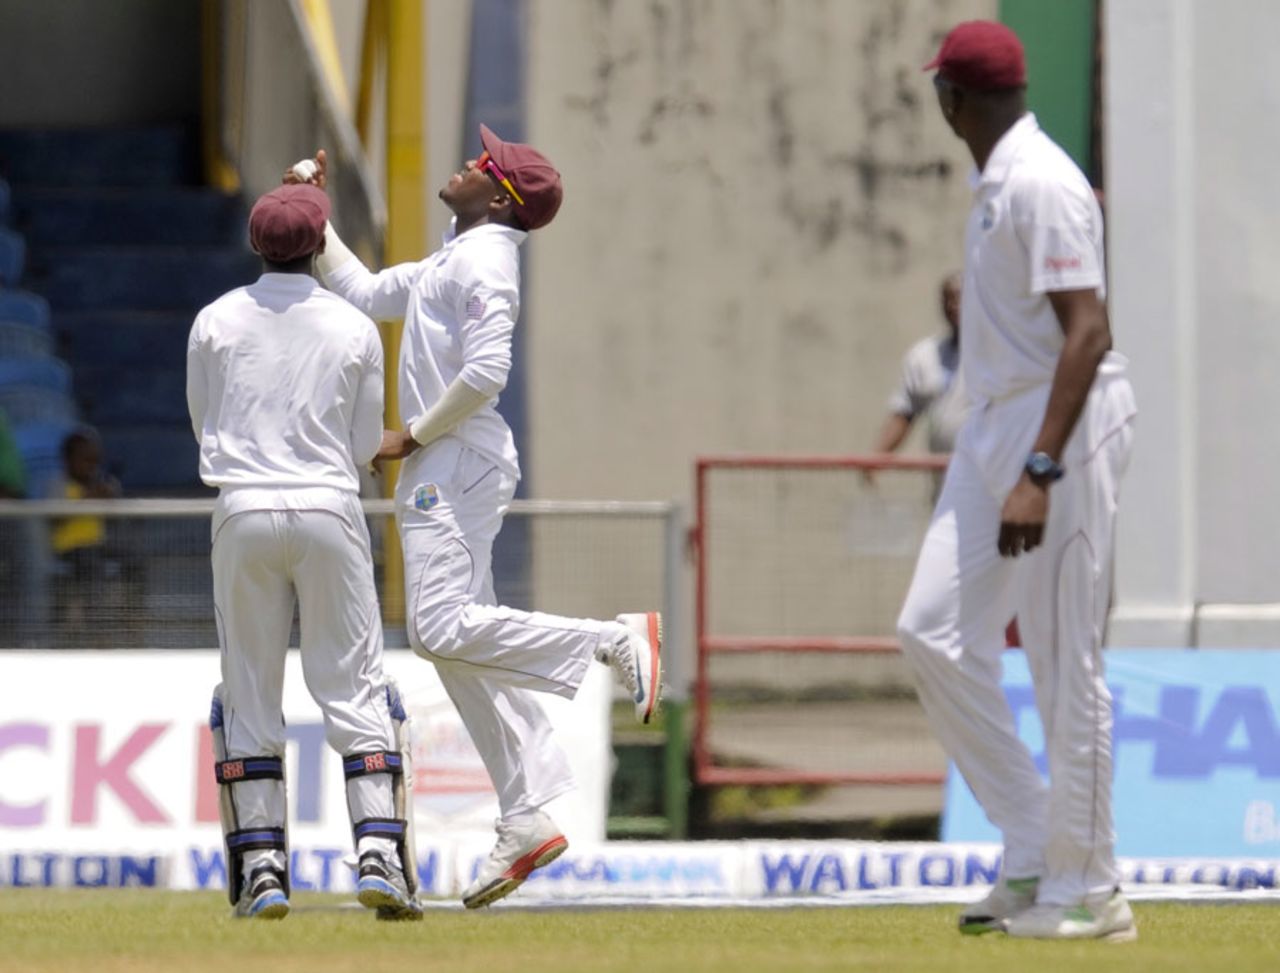 Darren Bravo picked up five catches in the innings, West Indies v Bangladesh, 1st Test, St Vincent, 3rd day, September 7, 2014